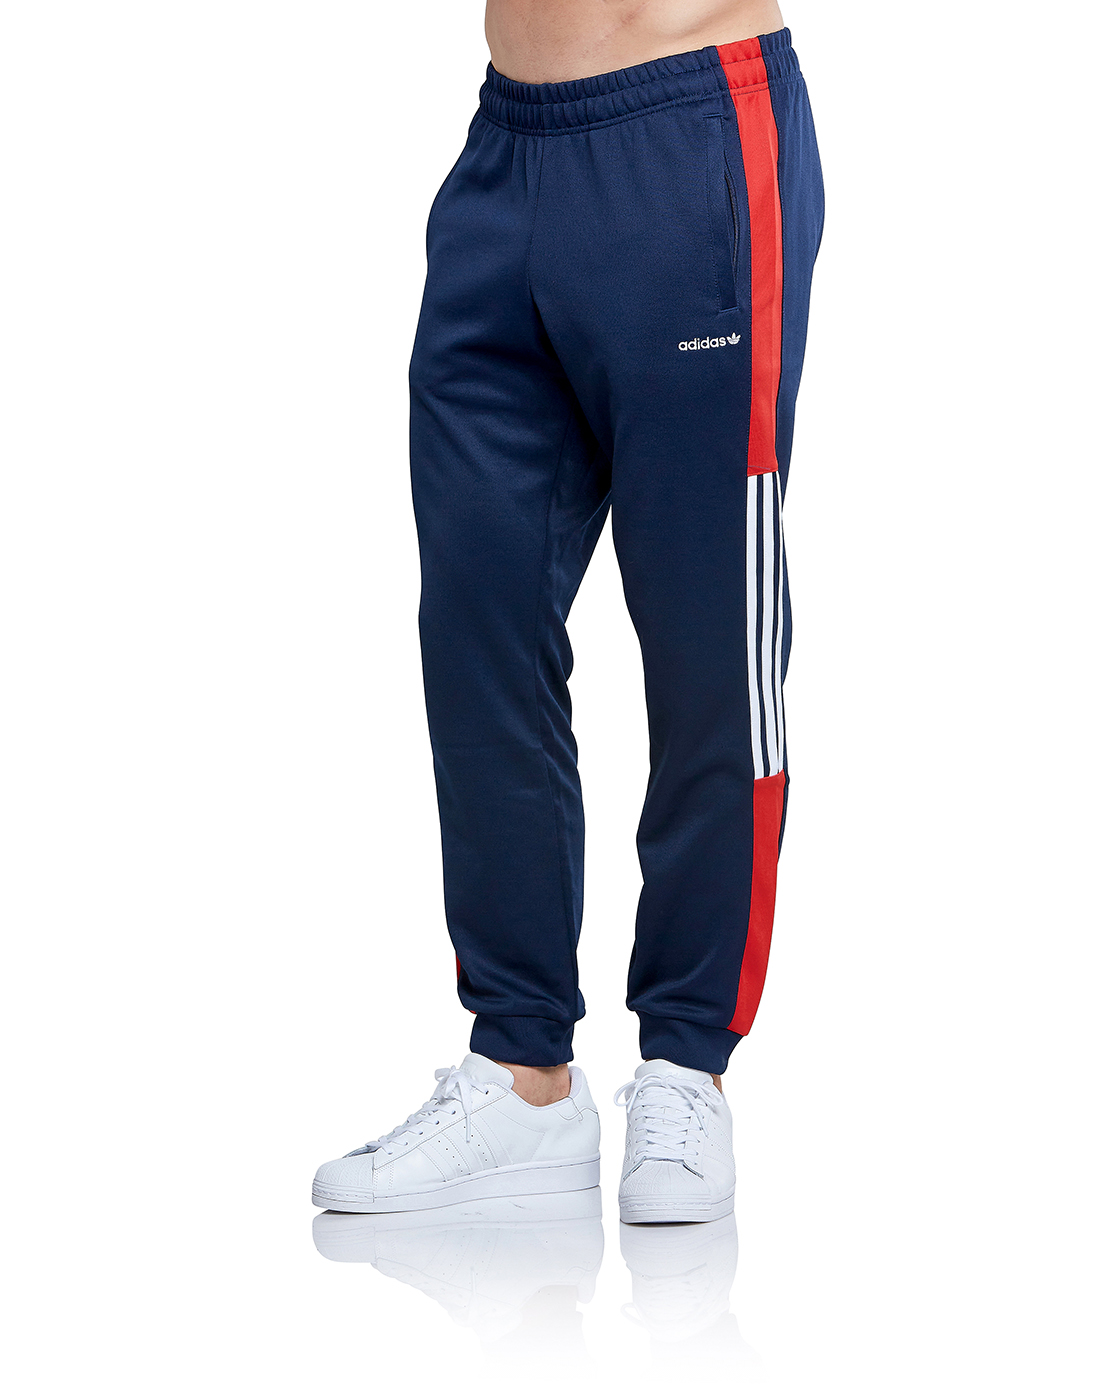 adidas Originals Mens Poly Track Pants - Navy | Life Style Sports IE